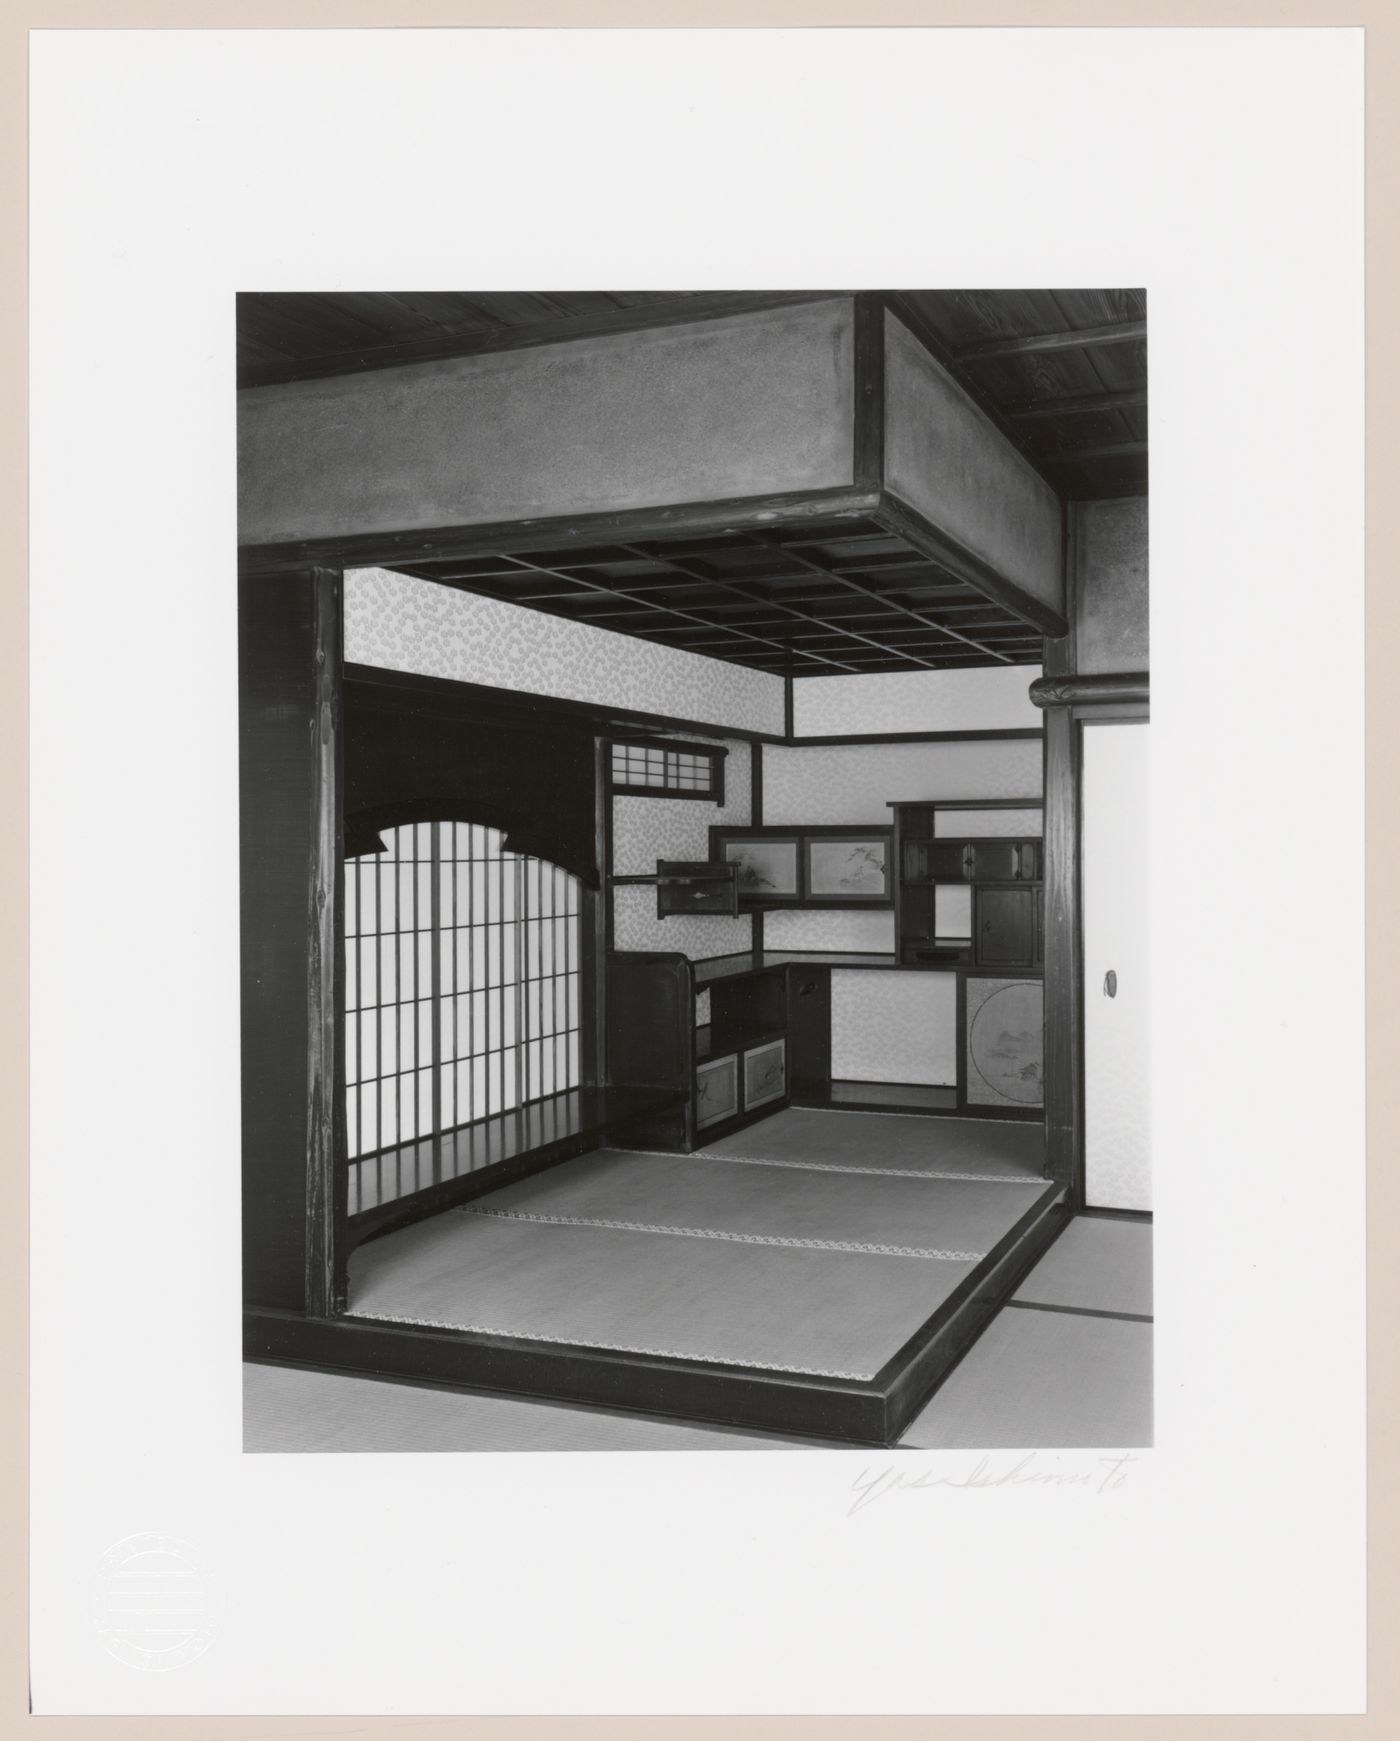 Interior view of the Imperial Dais and the Katsura Shelves in the New Palace (also known as the New Goten), Katsura Rikyu (also known as Katsura Imperial Villa), Kyoto, Japan